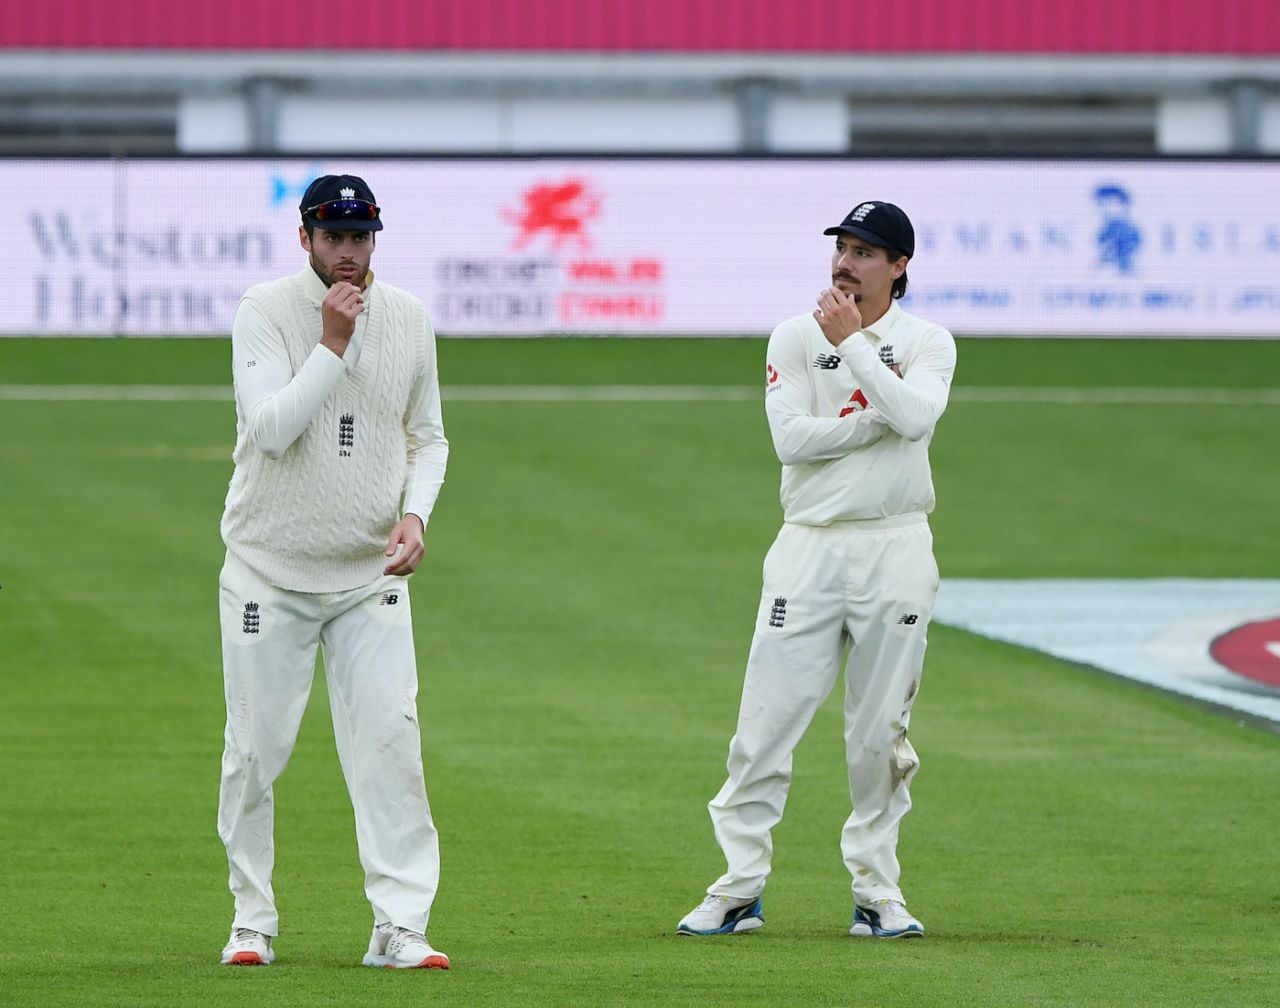 The slip cordon of Dom Sibley and Rory Burns can't quite believe that yet another chance has gone down, England v Pakistan, 3rd Test, Southampton, 3rd day, August 23, 2020